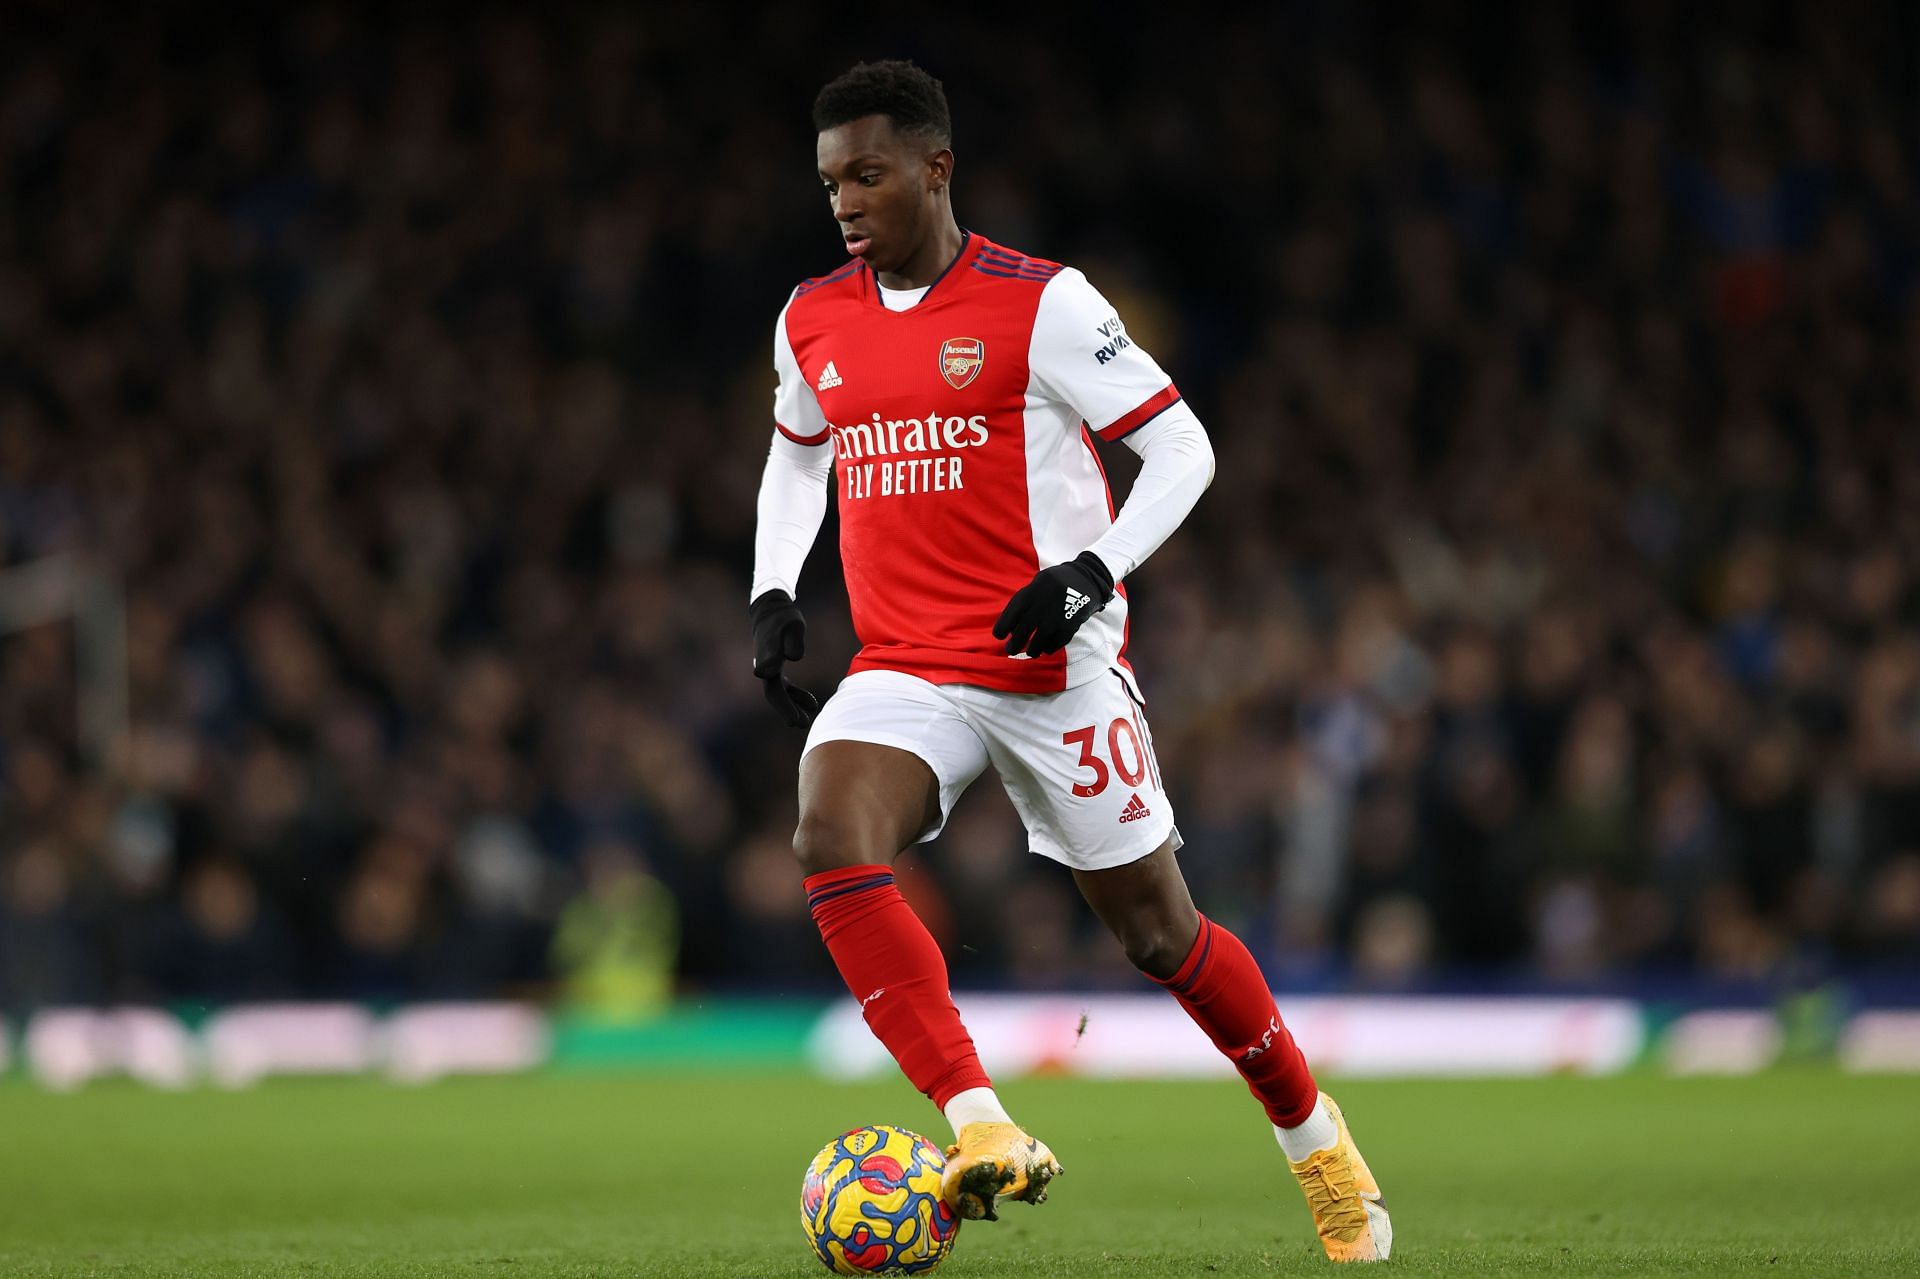 Mikel Arteta insists Arsenal want Eddie Nketiah to extend his stay at the Emirates.